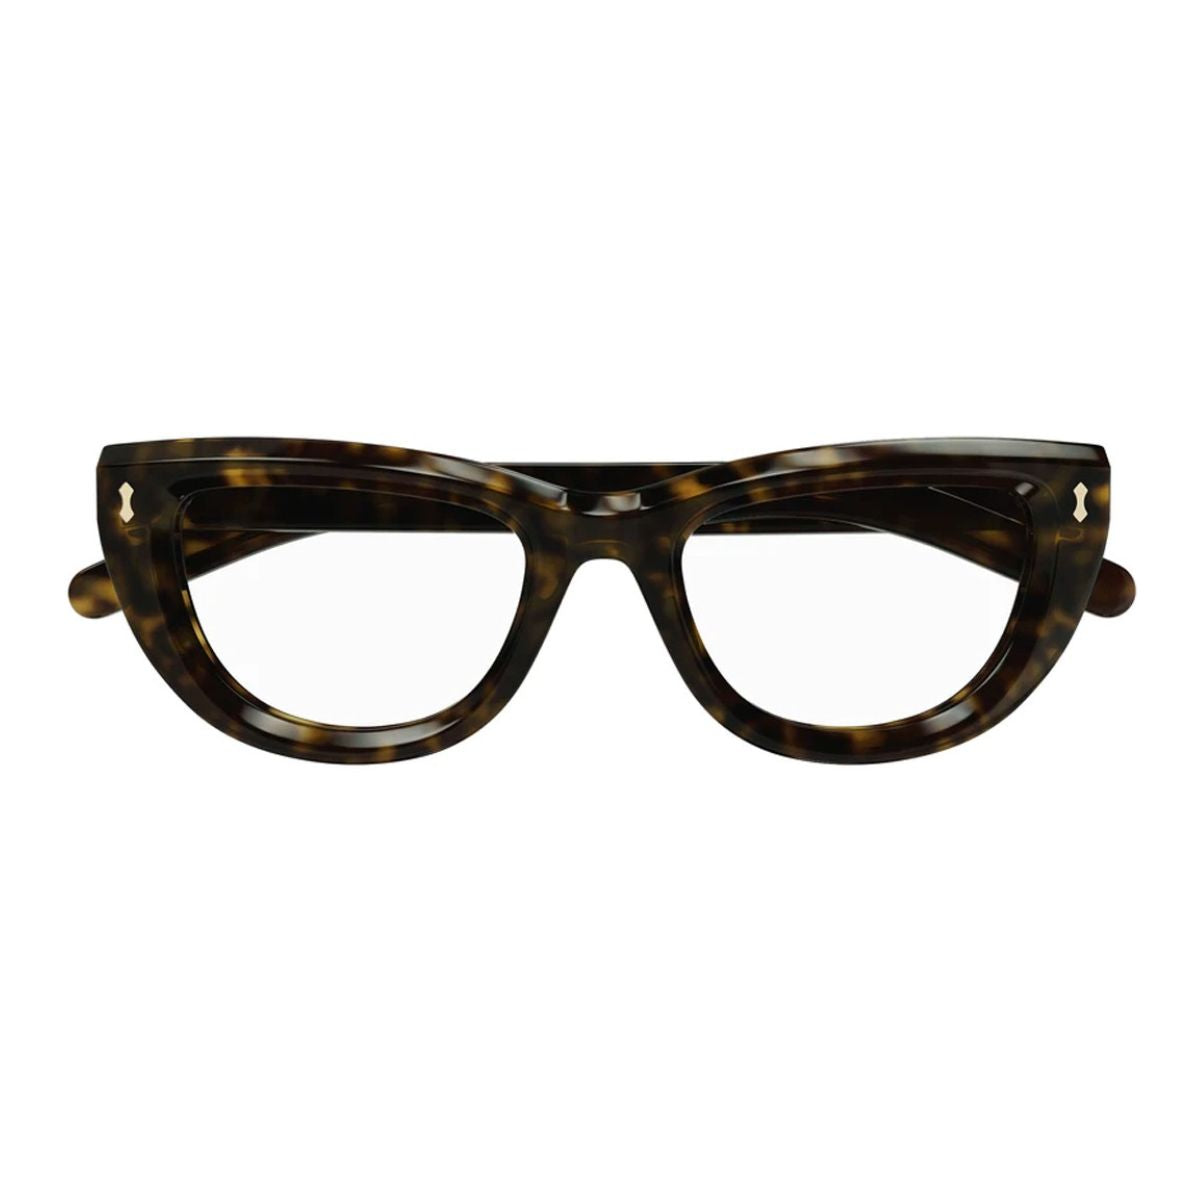 "Gucci 1521O 002 Women's Frames - Elegant eyewear designed for the modern woman, available at Optorium."